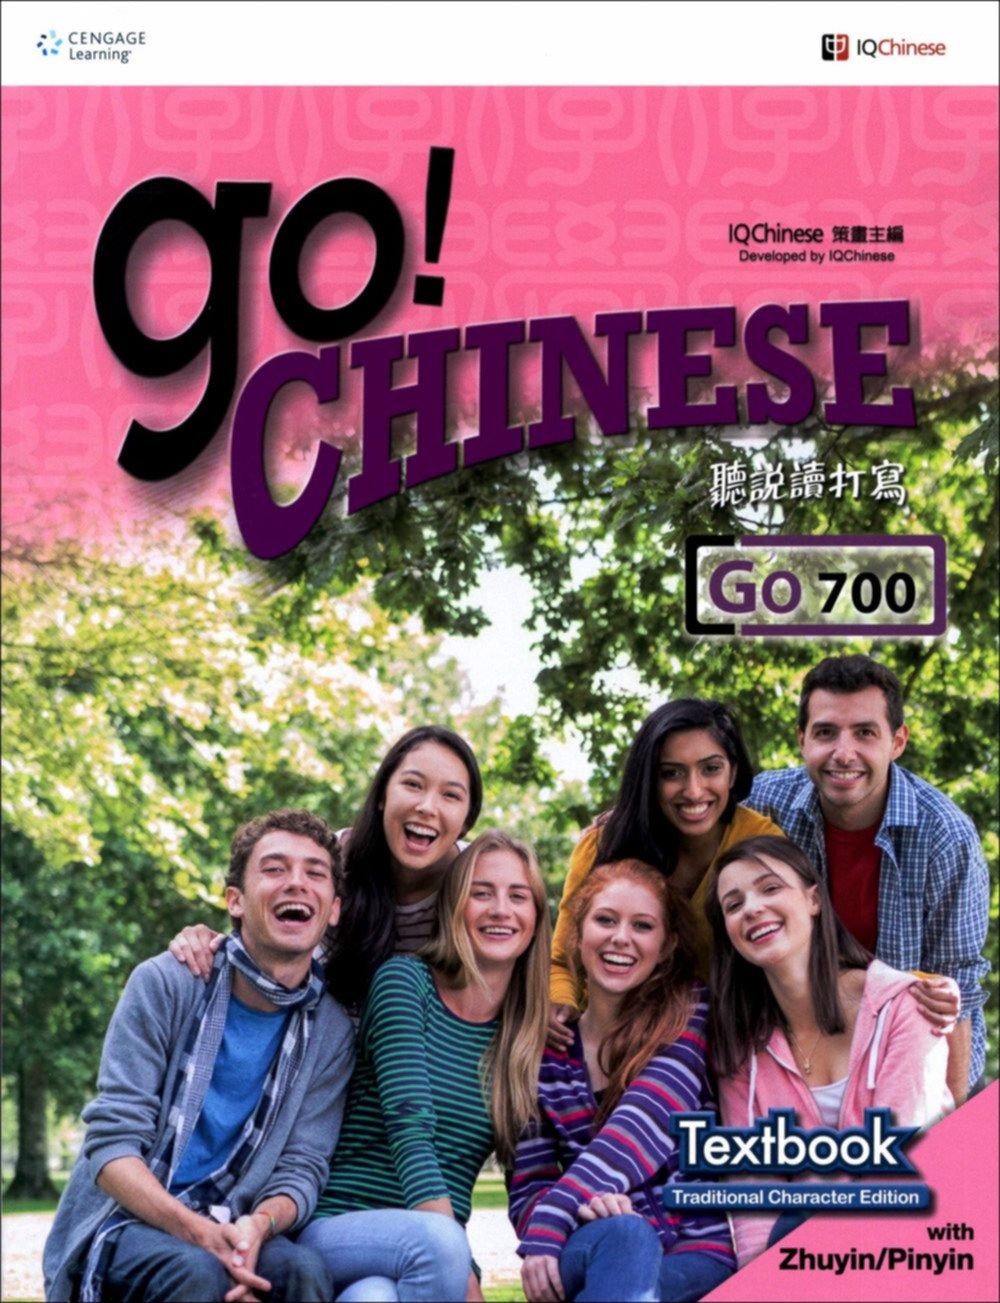 Go! Chinese Go700 Textbook (Traditional Character Edition with Zhuyin/Pinyin)